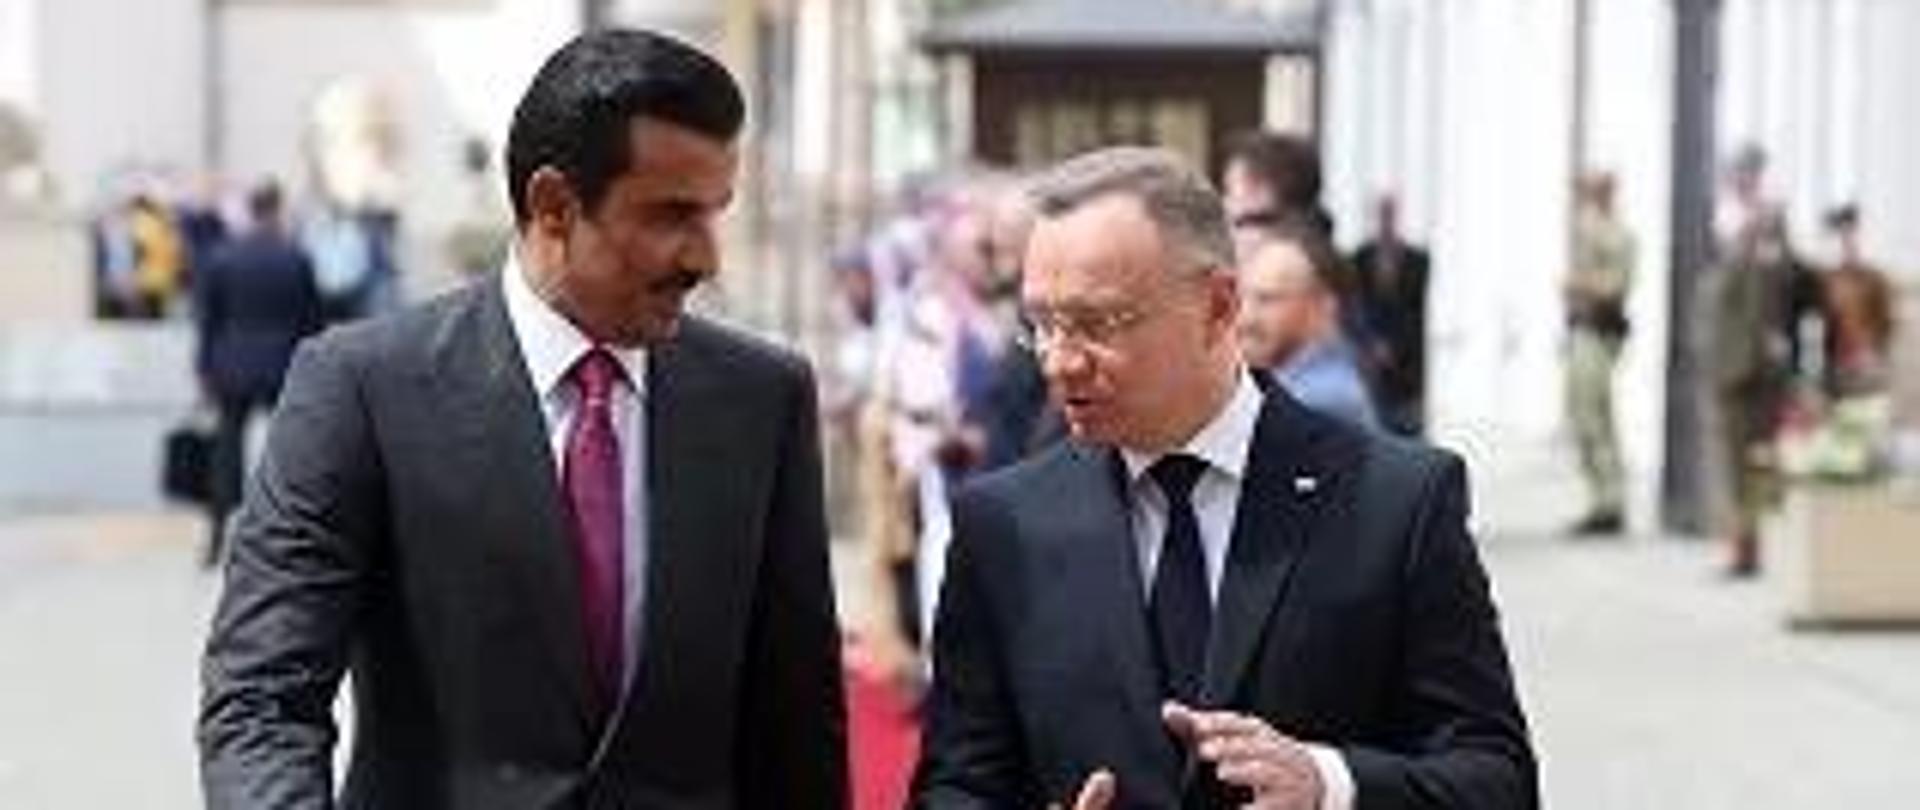 Official visit of the Emir of the State of Qatar to Poland